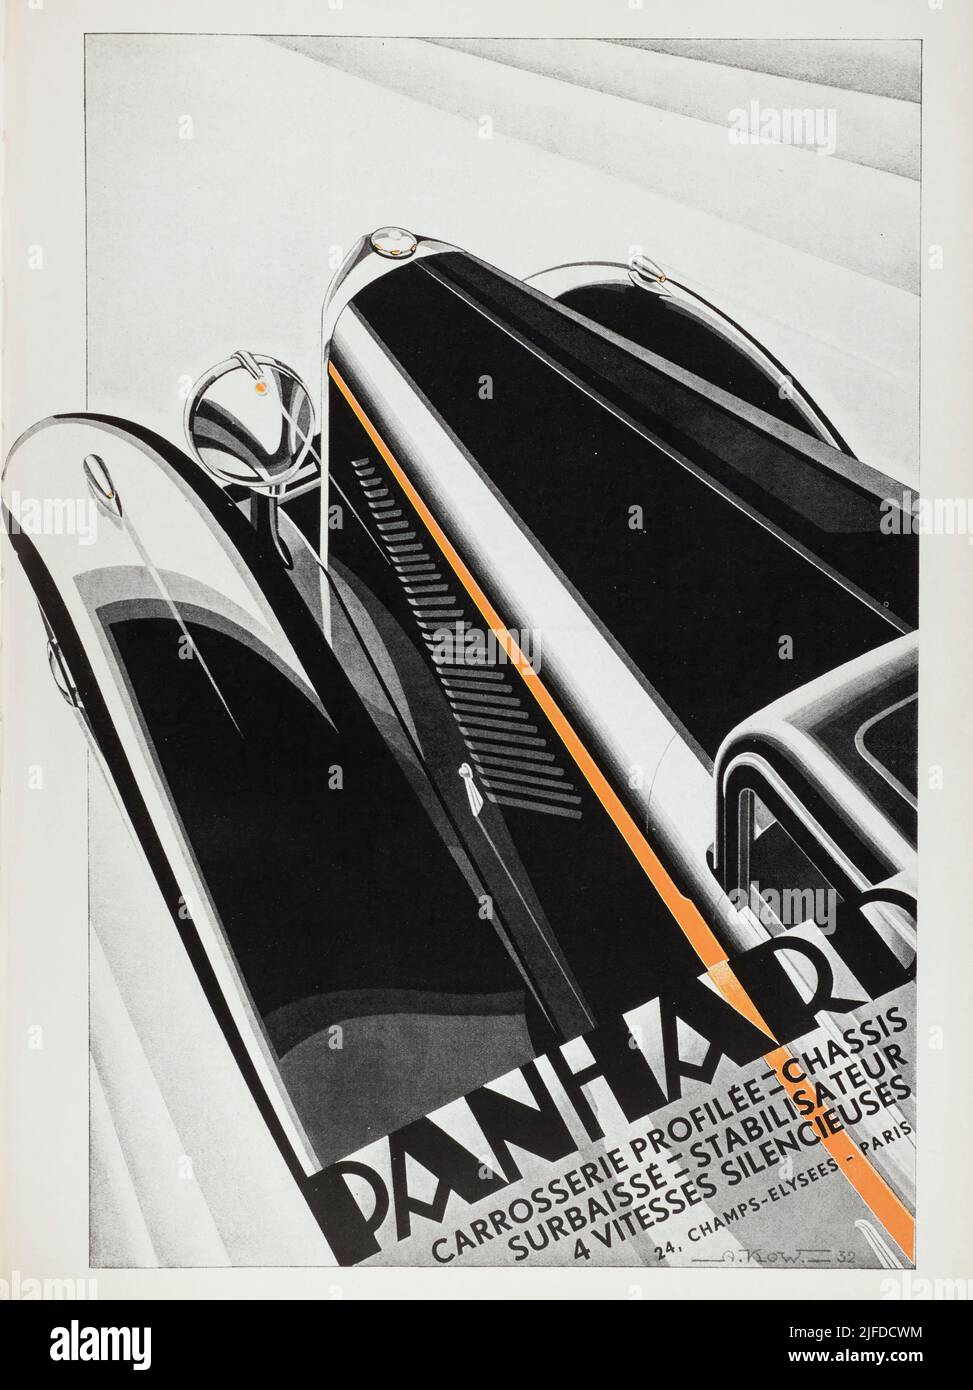 Advertising for PANHARD - Extract from "L'Illustration Journal Universel" - French illustrated magazine - 1932 Stock Photo